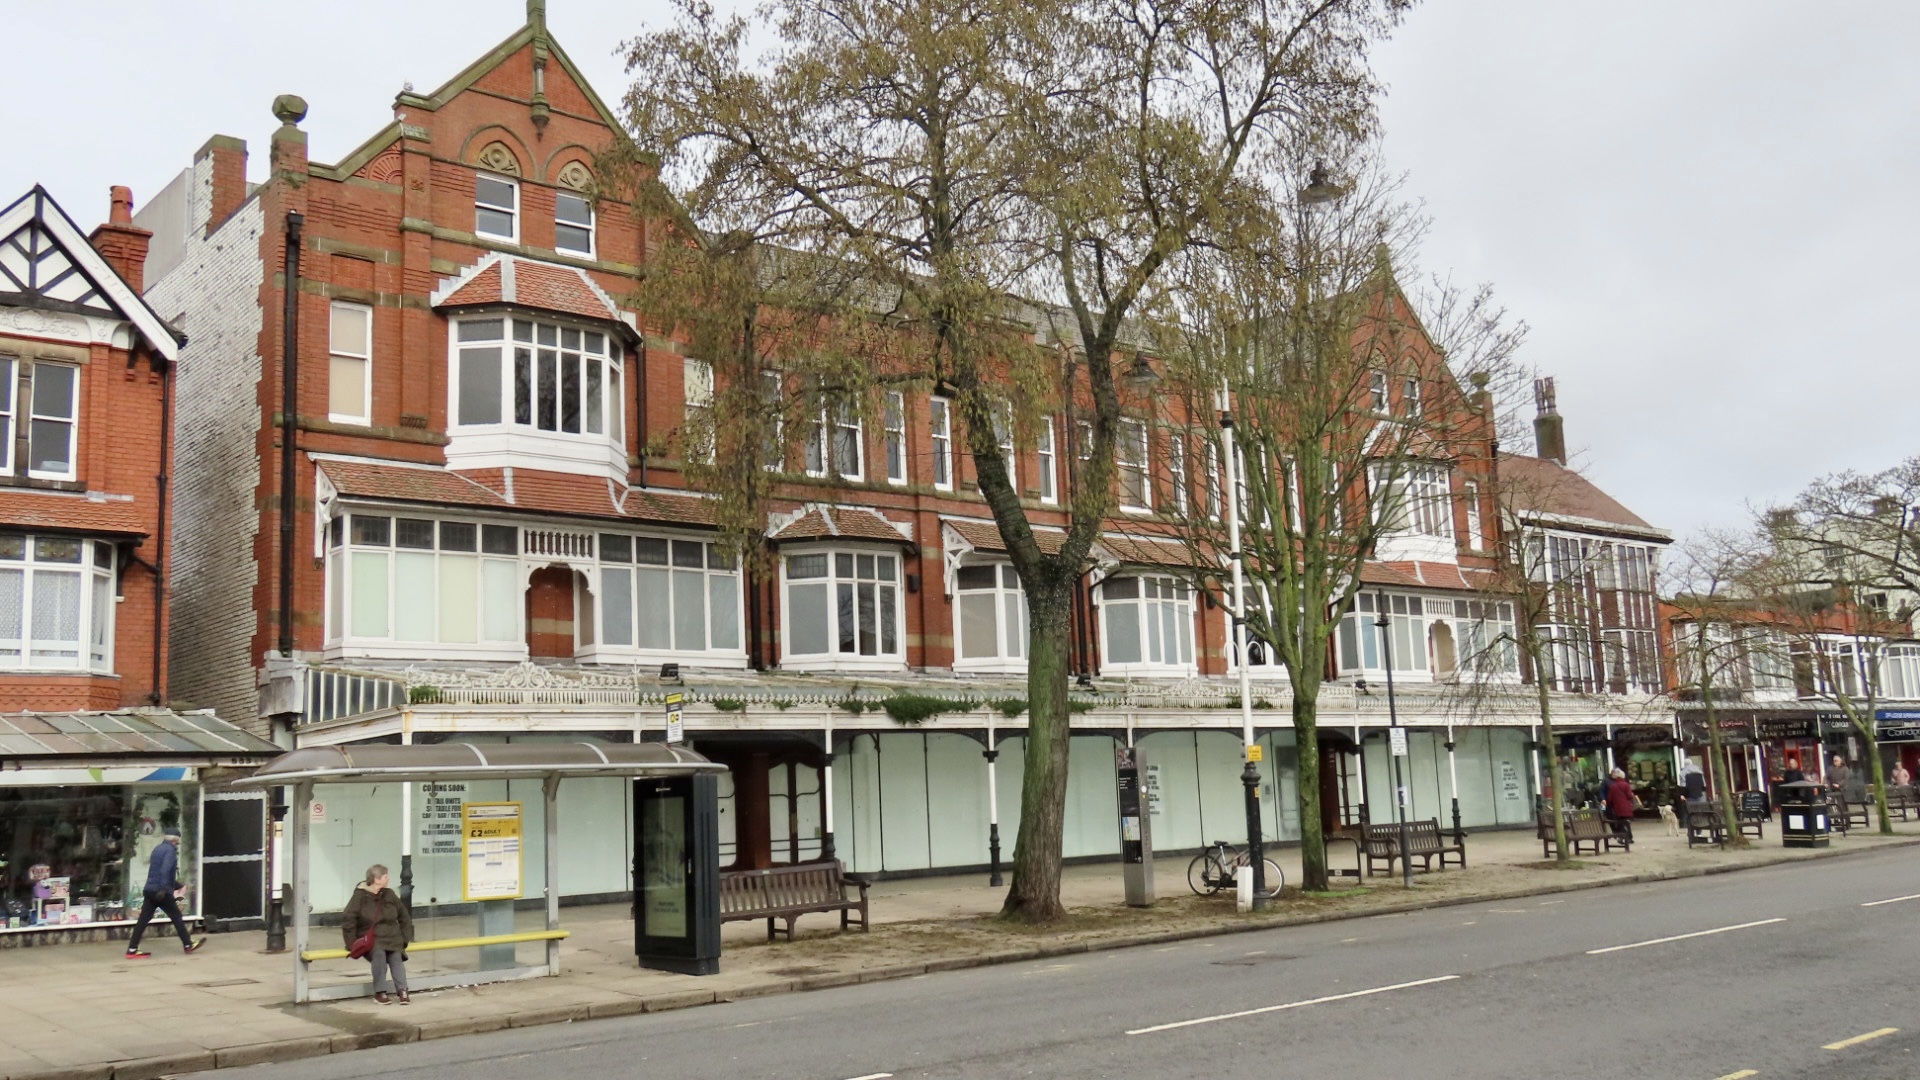 The former Debenhams department store building on Lord Street in Southport. Photo by Andrew Brown Stand Up For Southport